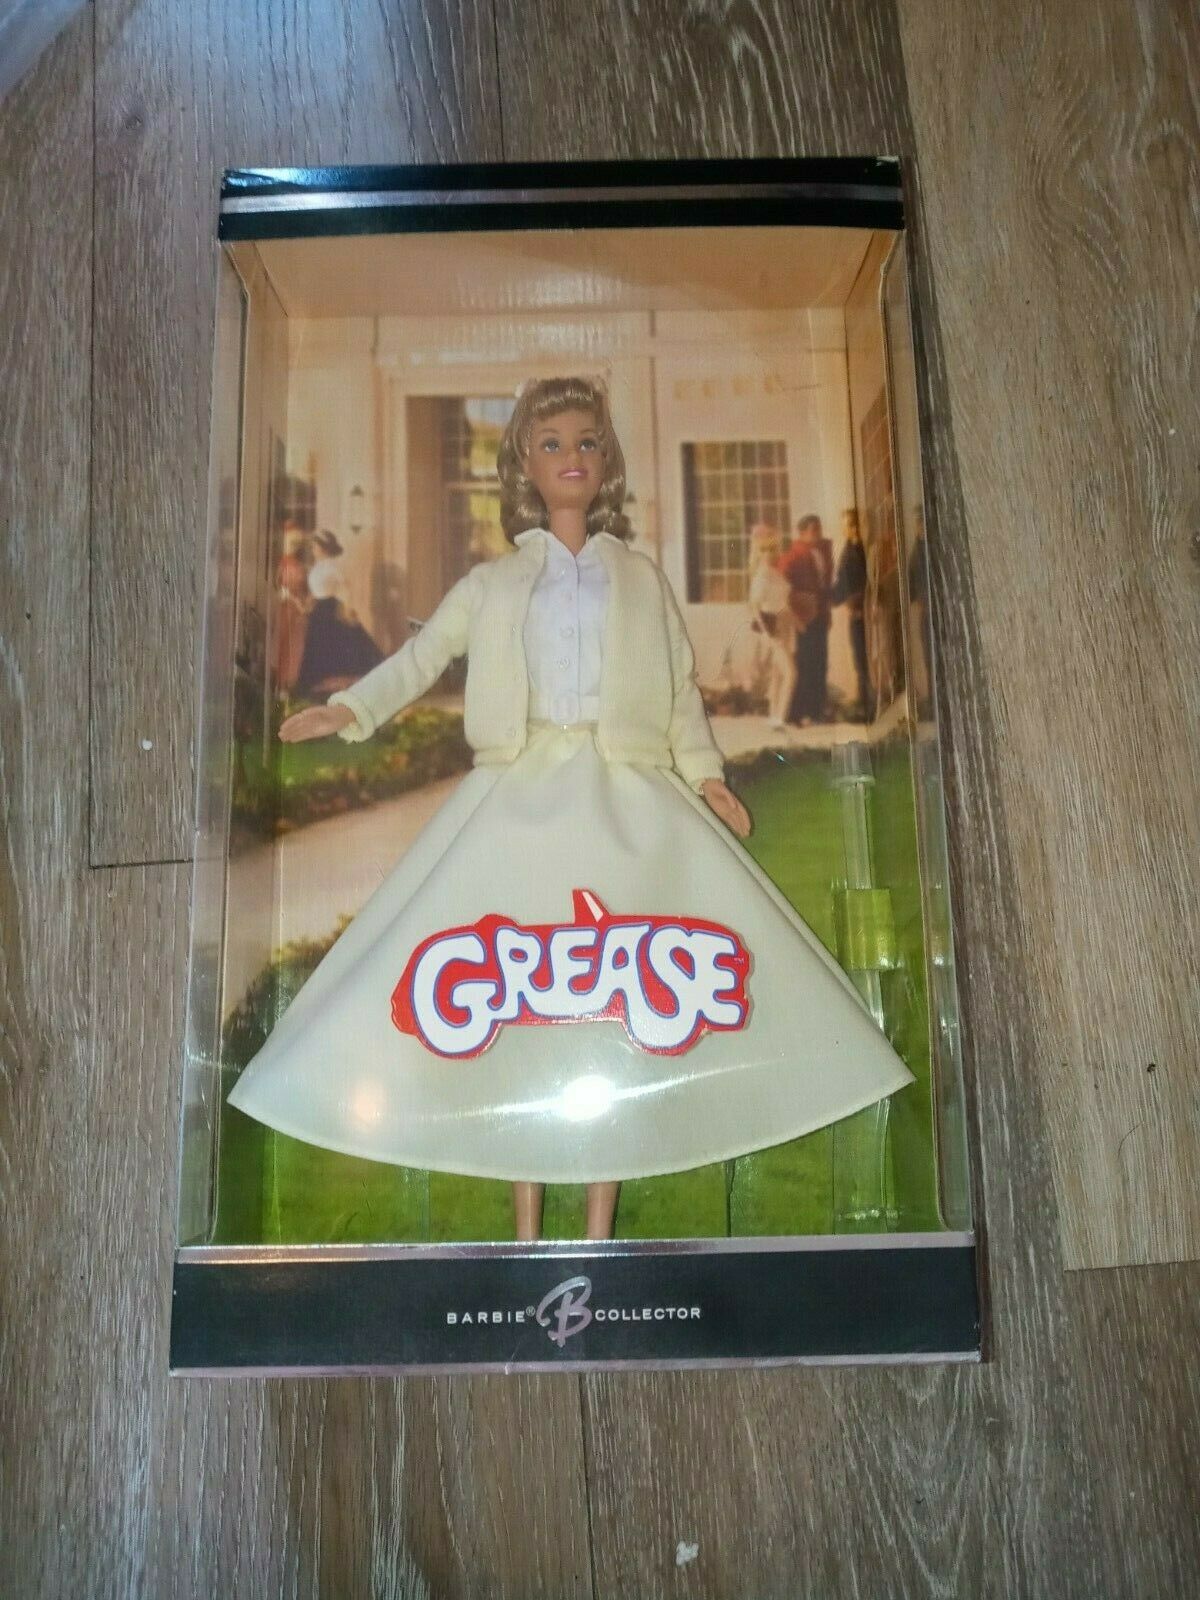 Grease Sandy Barbie in Yellow Poodle Skirt 2004 Barbie Collectors Edition